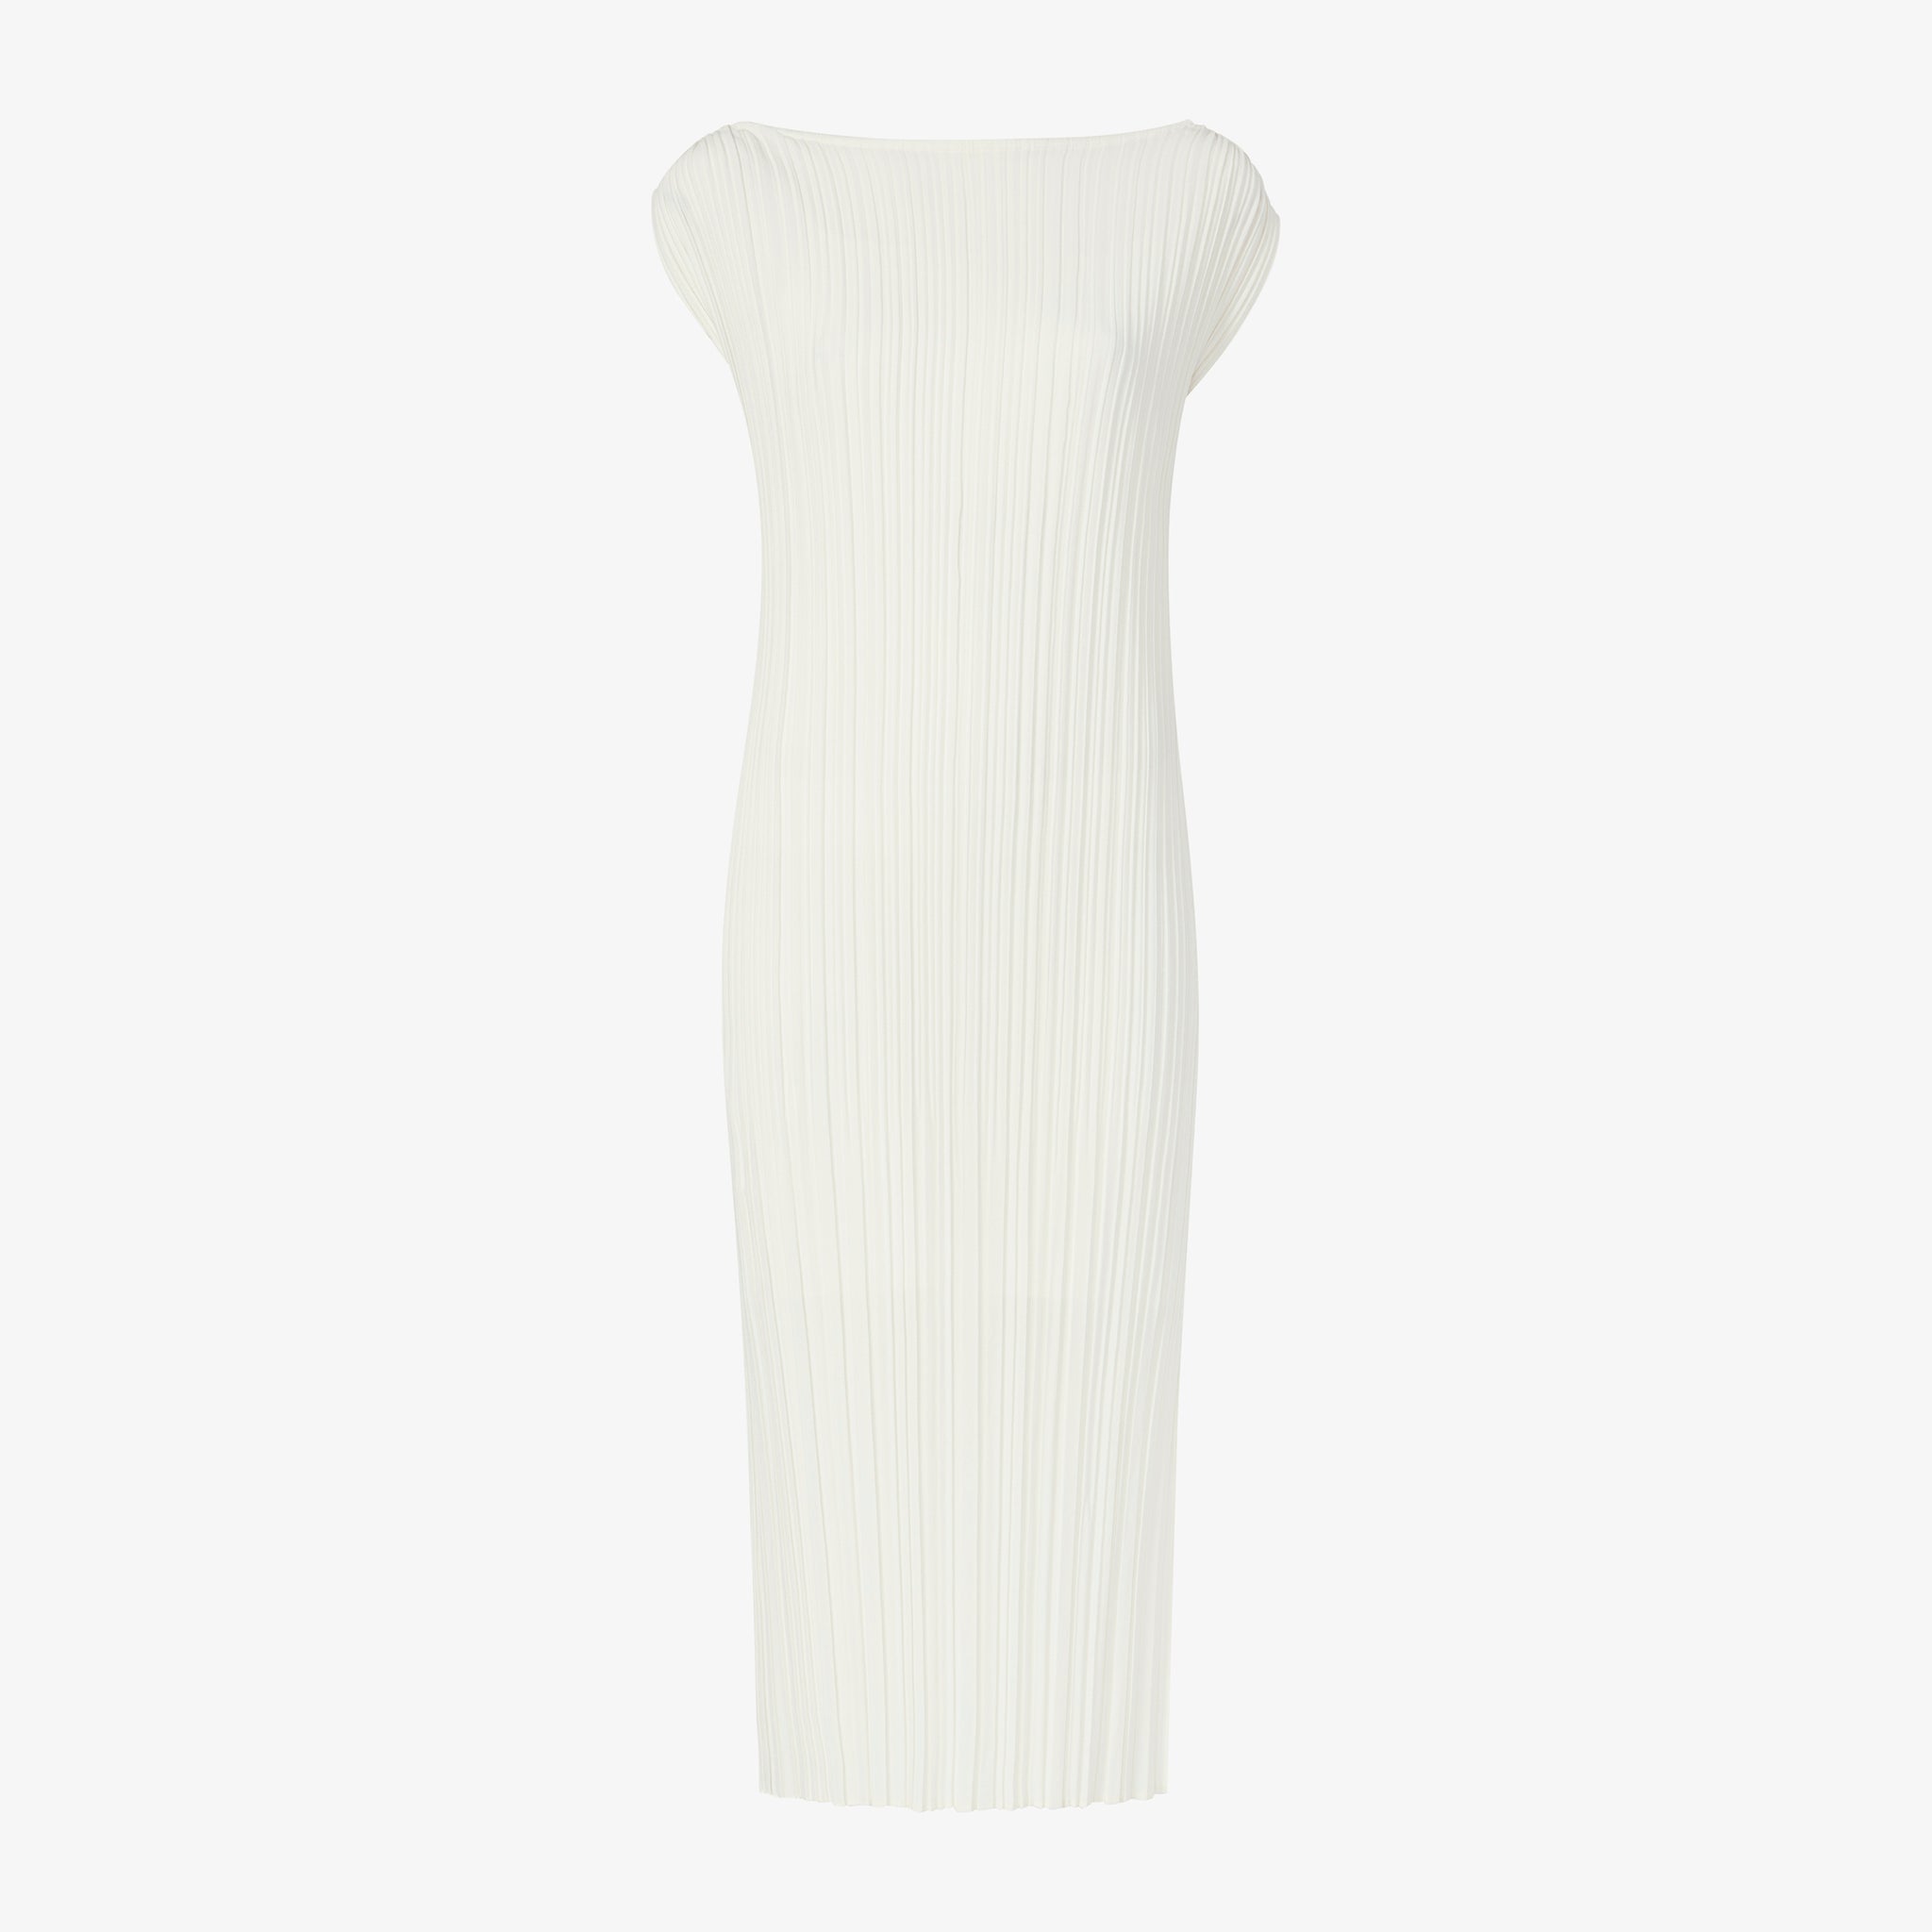 Packshot image of the Edith Dress - Micro Pleat in Ivory